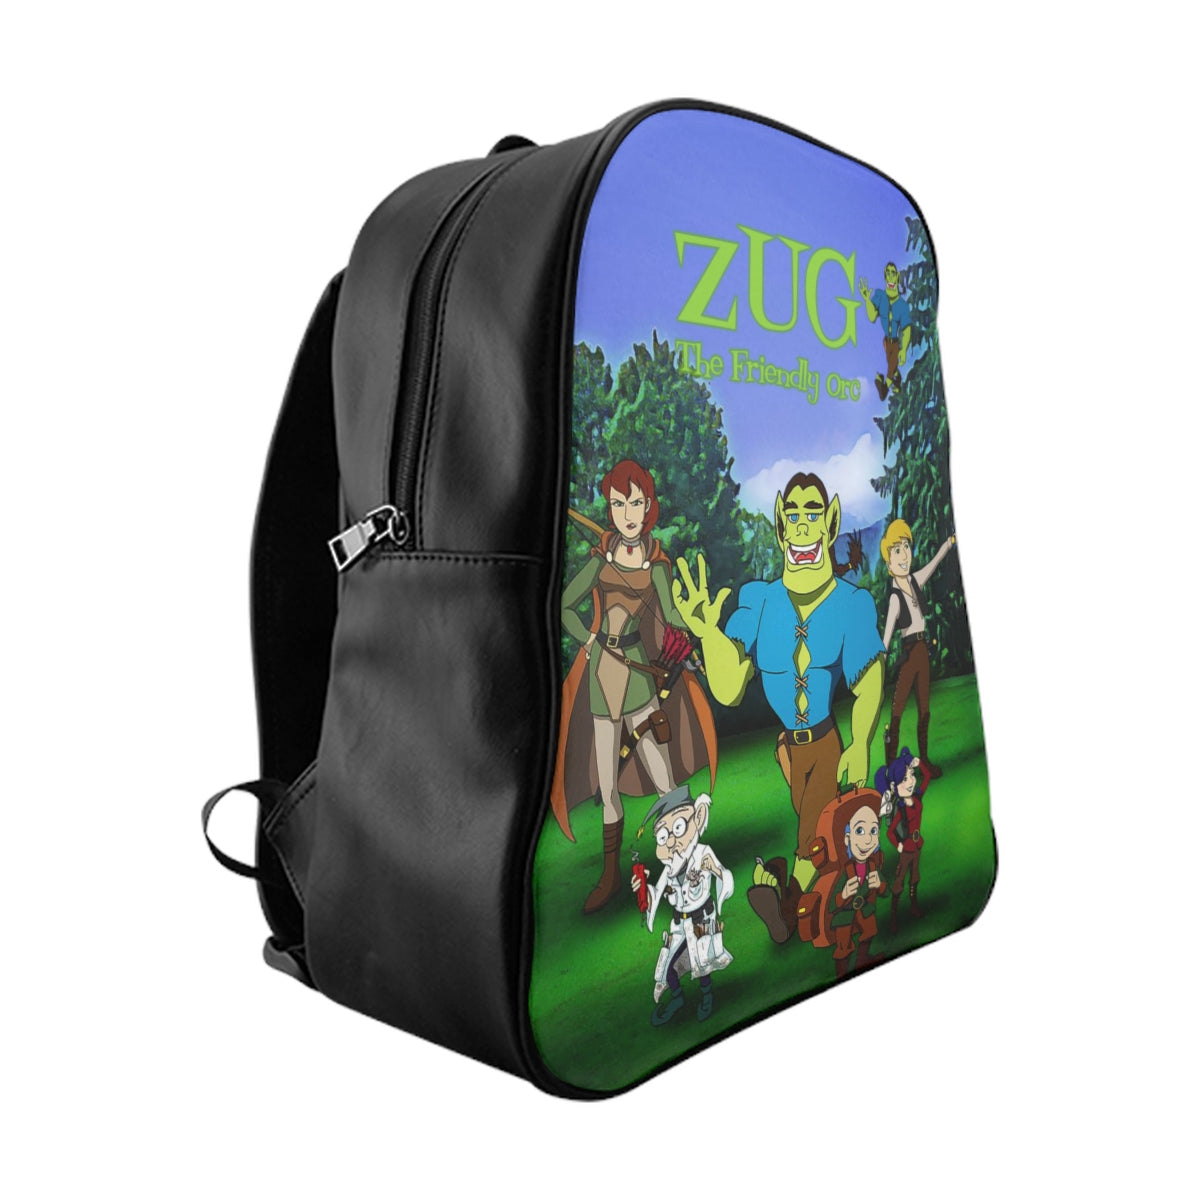 ZUG and friends KIDS Backpack!